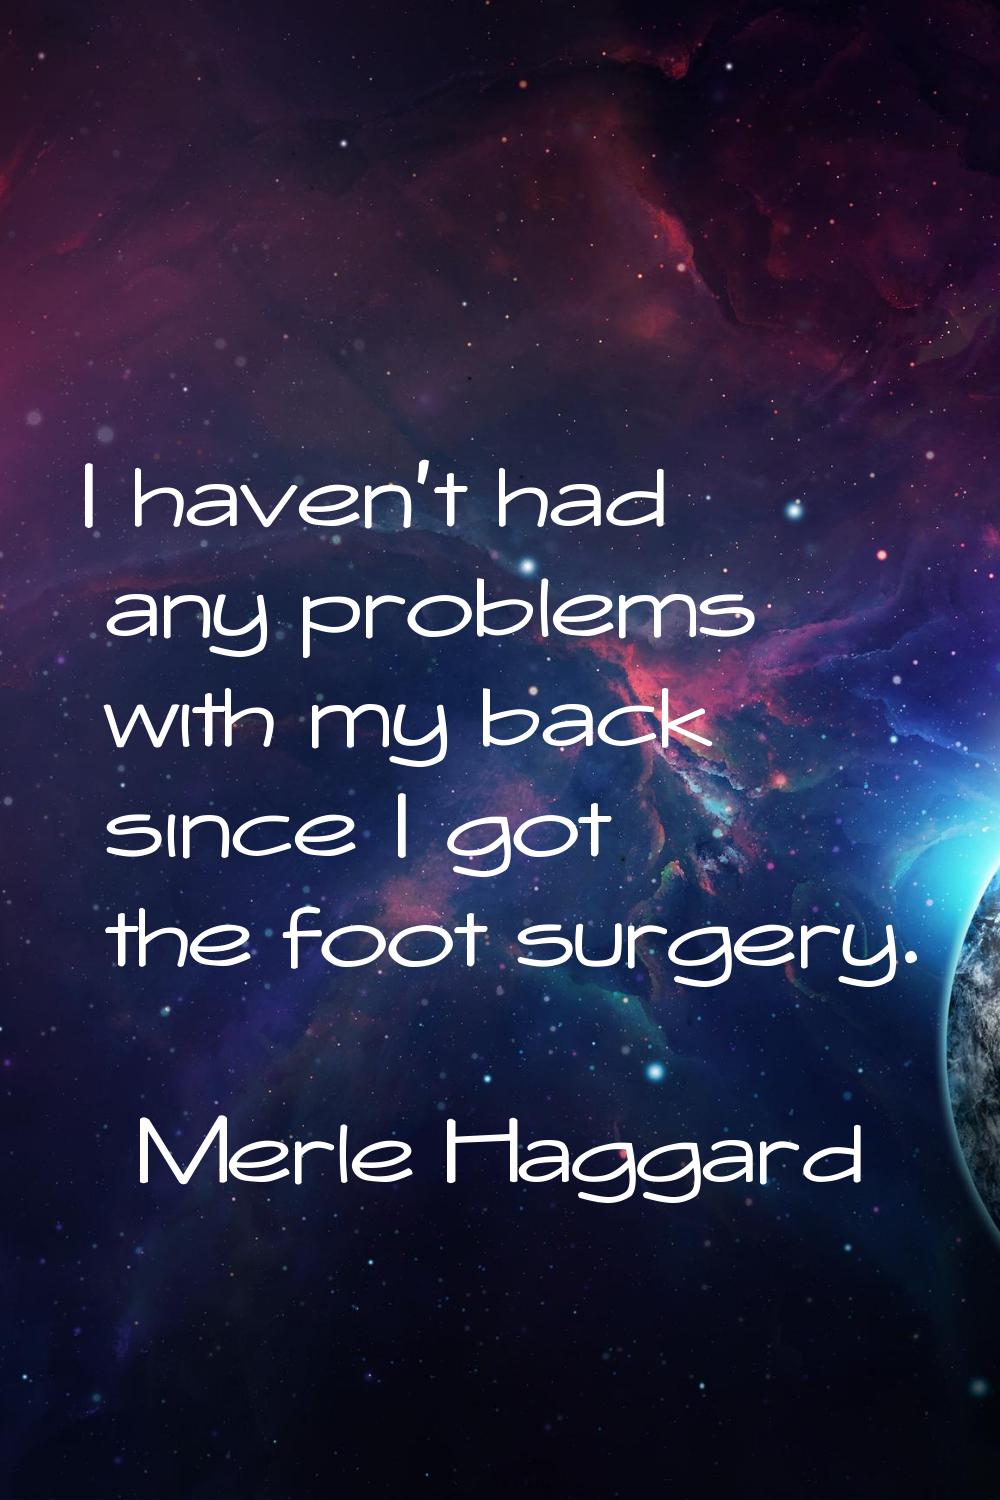 I haven't had any problems with my back since I got the foot surgery.